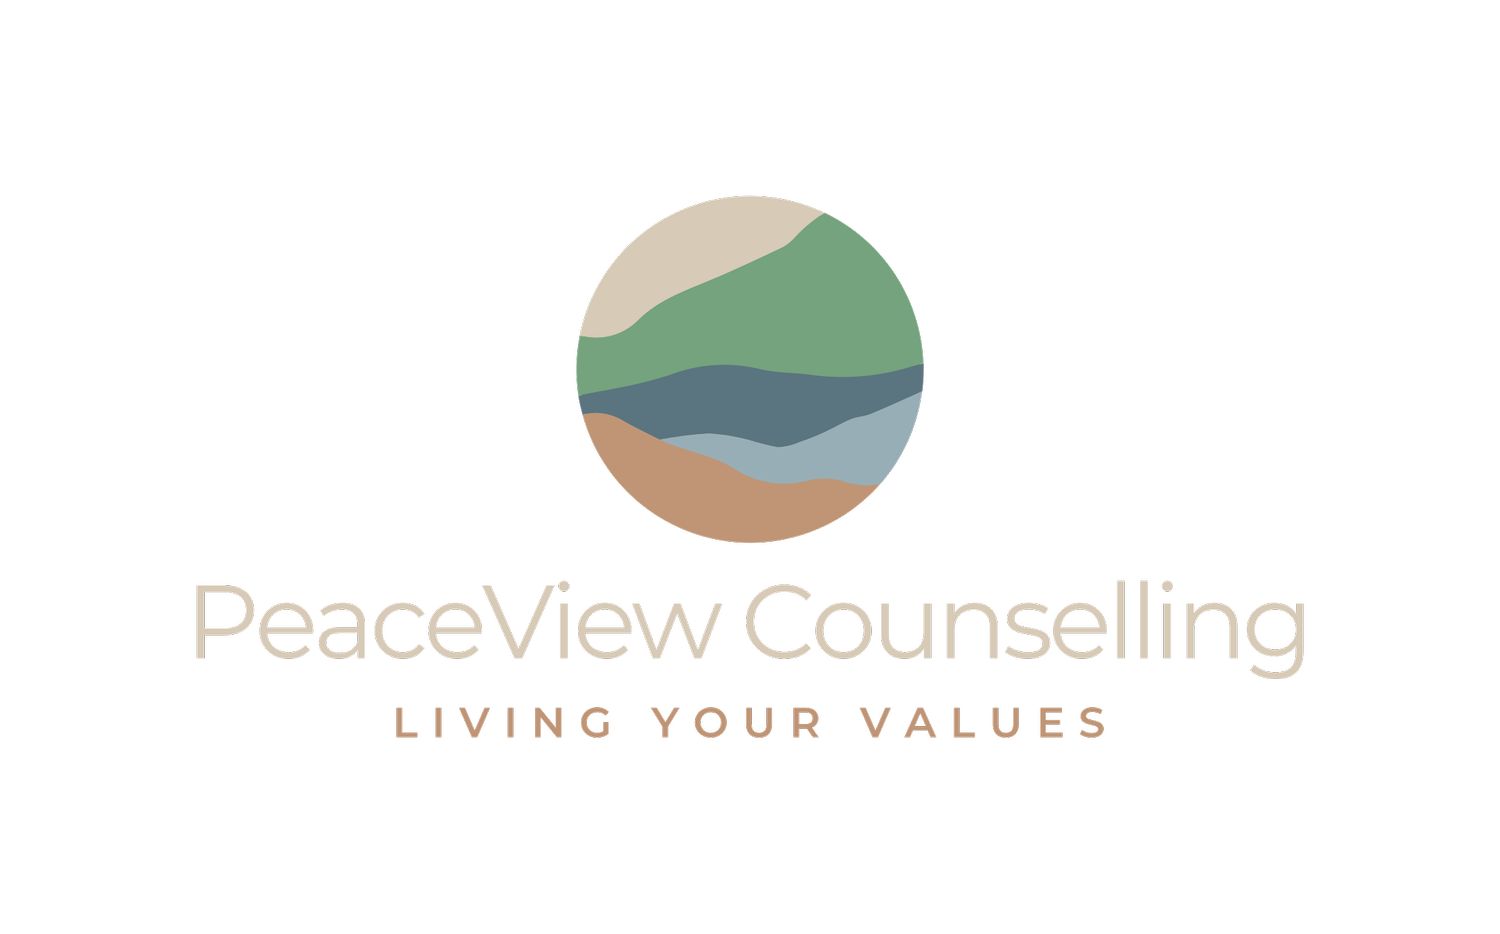 PeaceView Counselling